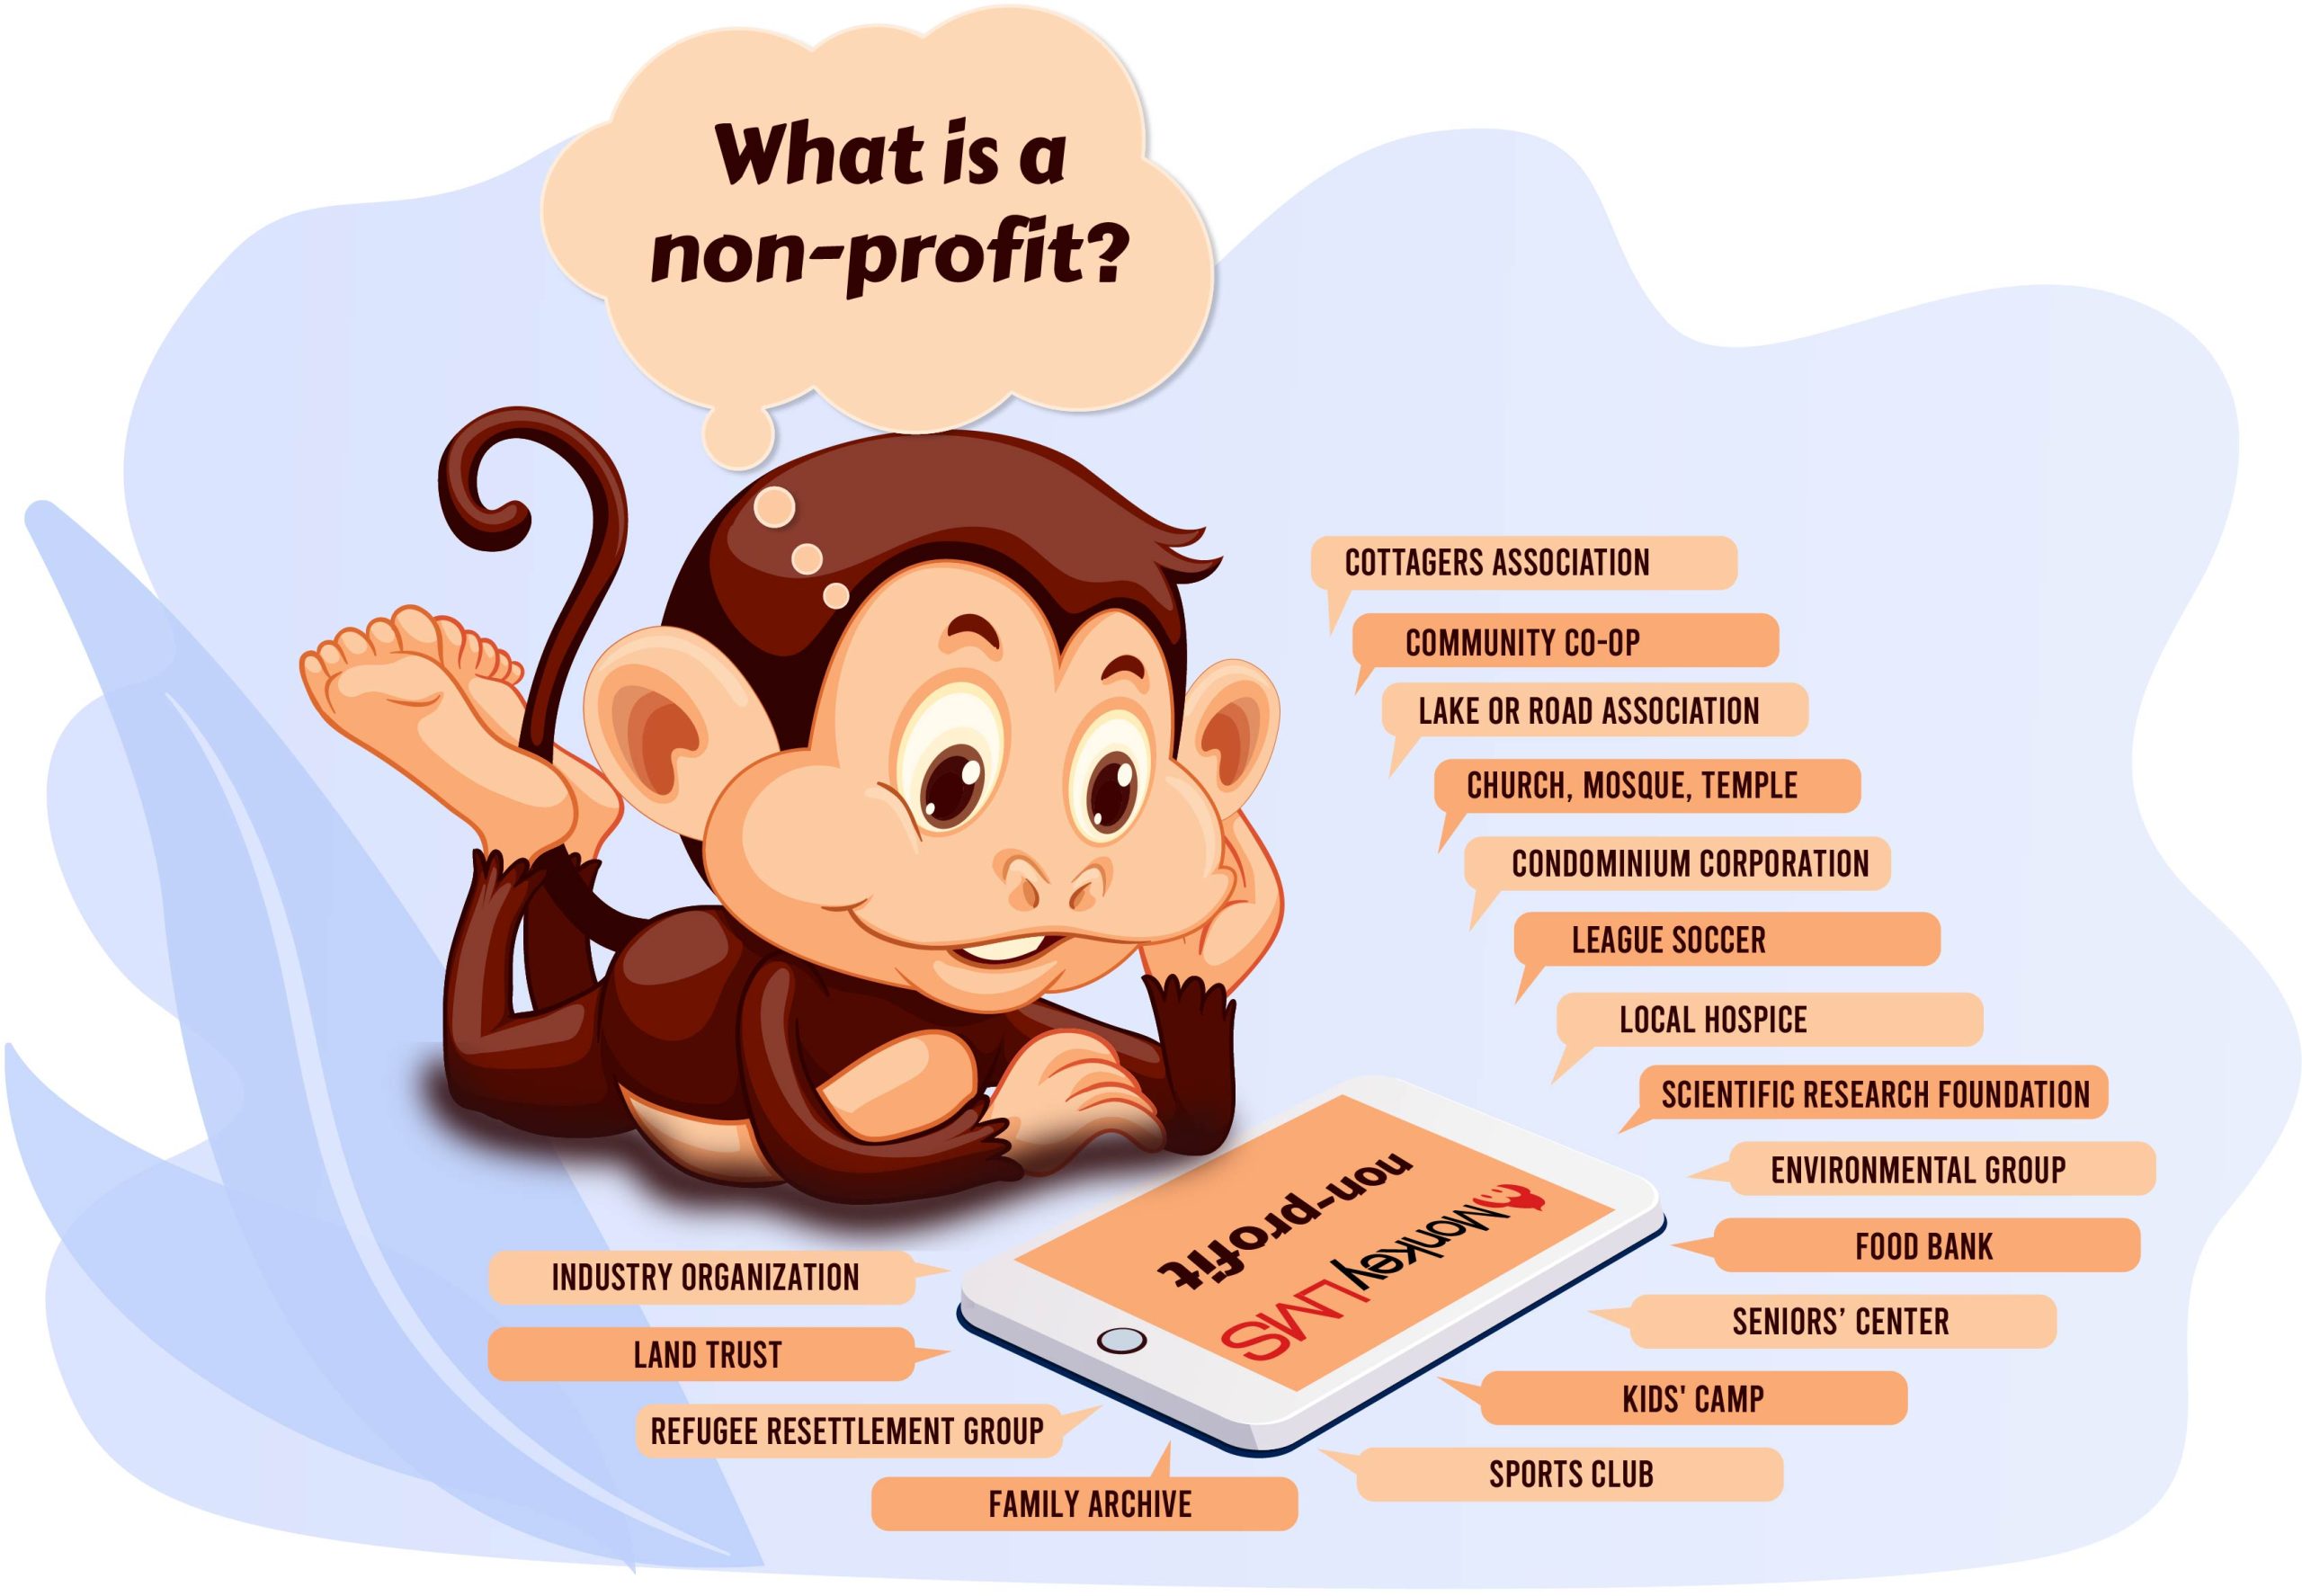 A picture of a monkey looking at the MonkeyLMS non-profit website on a tablet screen, asking "What is a non-profit?" There are 15 bubbles with answers: Cottagers Association, Lake/Road Association, Place of Worship, Condominium Corporation, League Soccer, Local Hospice, Research Foundation, Environmental Group, Food Bank, Seniors' Center, Kids' Camp, Sports Club, Family Archive, Land Trust, Industry Organization, Community Co-Op.